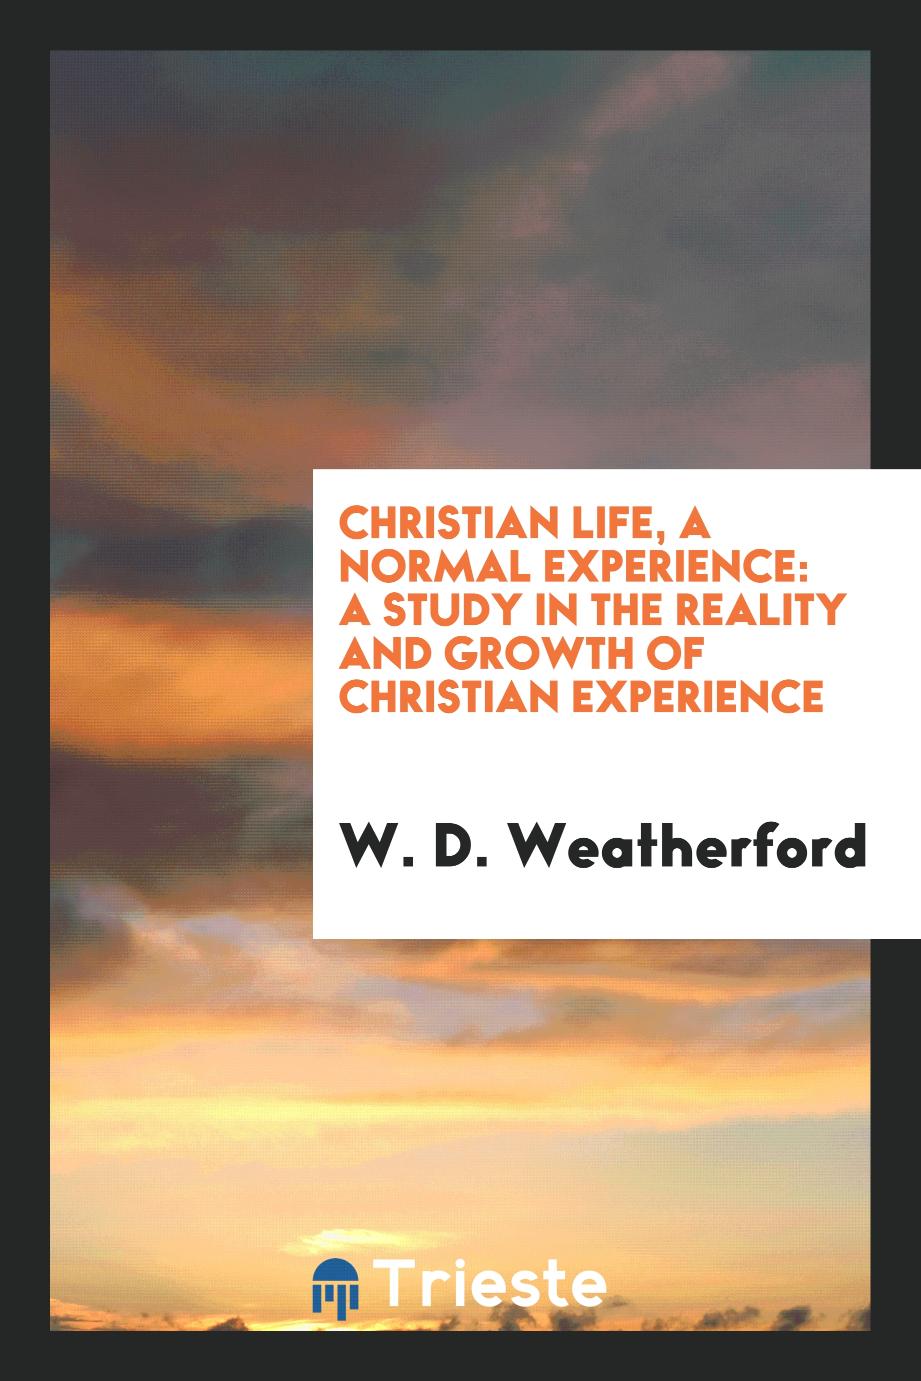 Christian Life, a Normal Experience: A Study in the Reality and Growth of Christian Experience